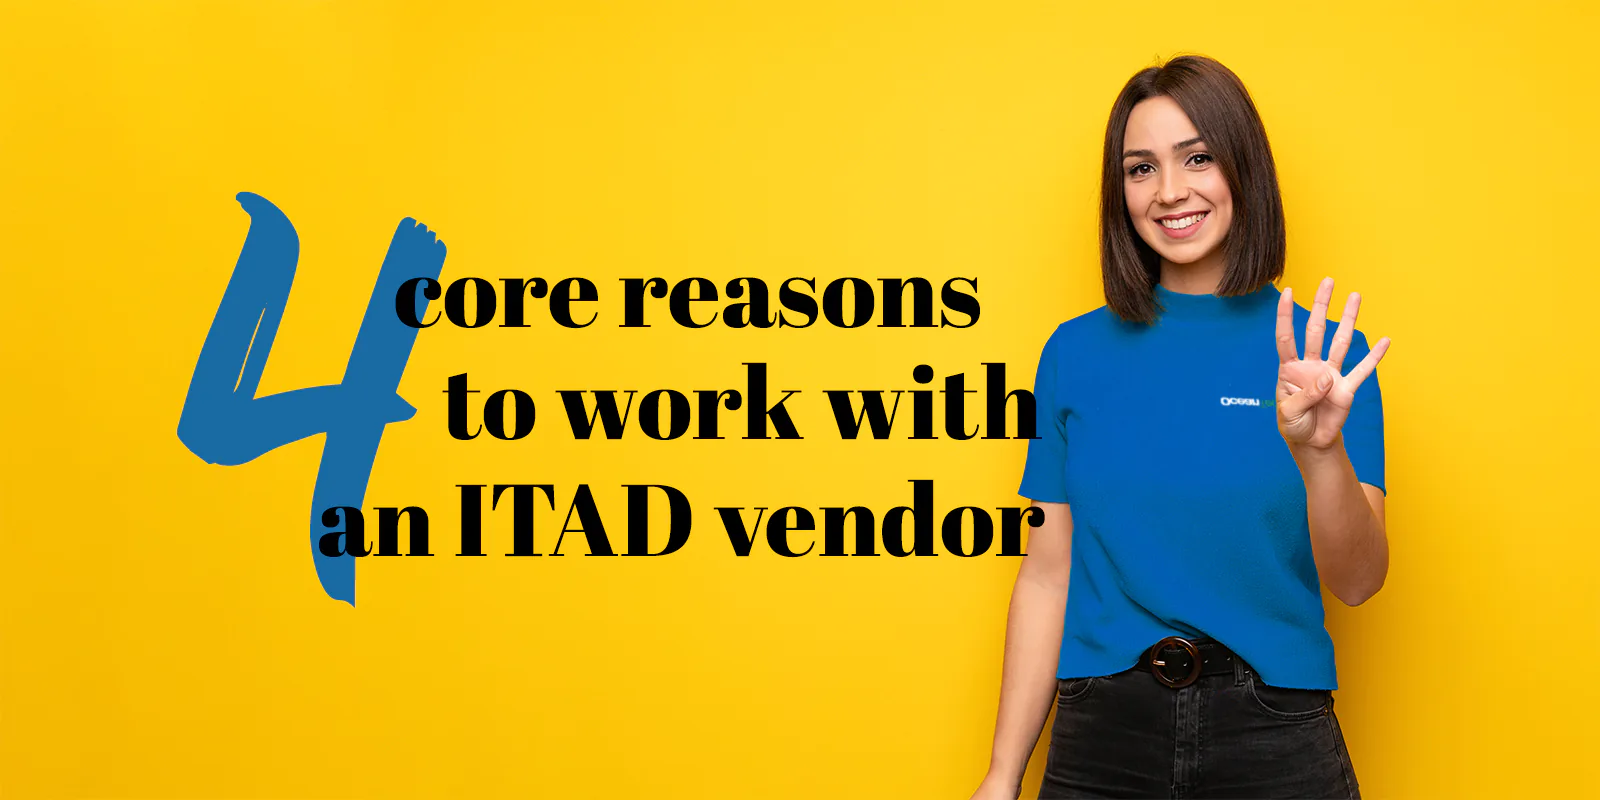 Four reasons to work with an ITAD that you shouldn’t ignore part 2